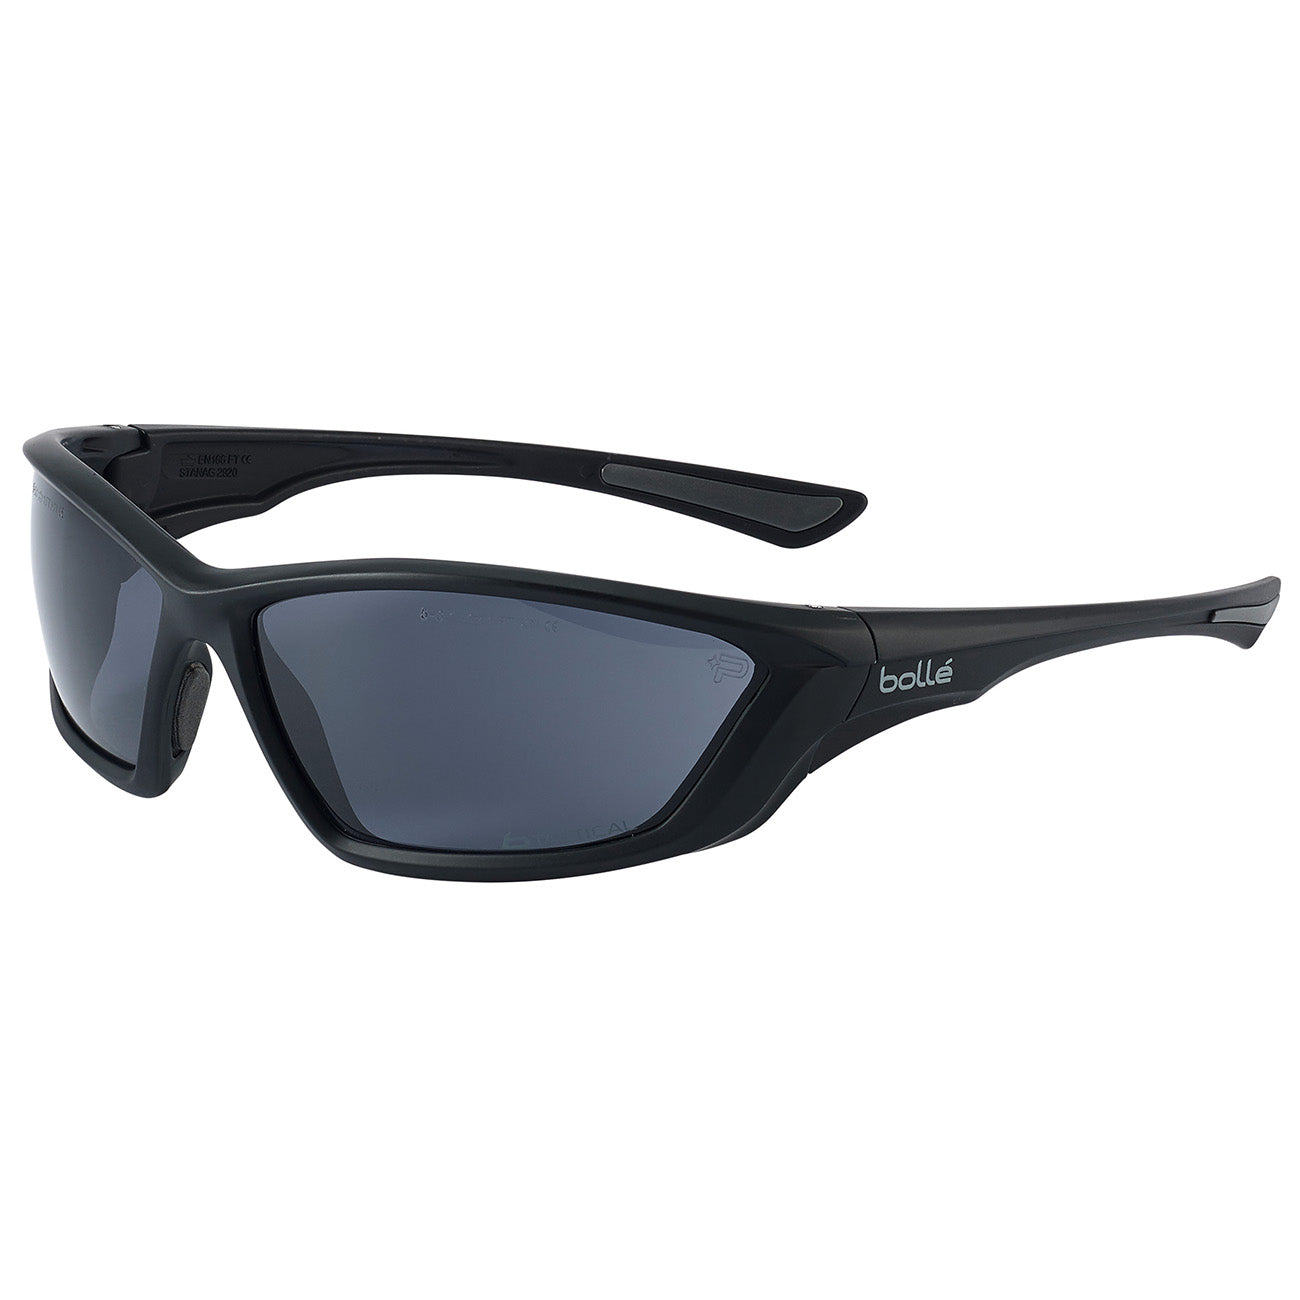 Bolle SWAT SWATPSF Tactical Ballistic Sunglasses with Smoke Lens